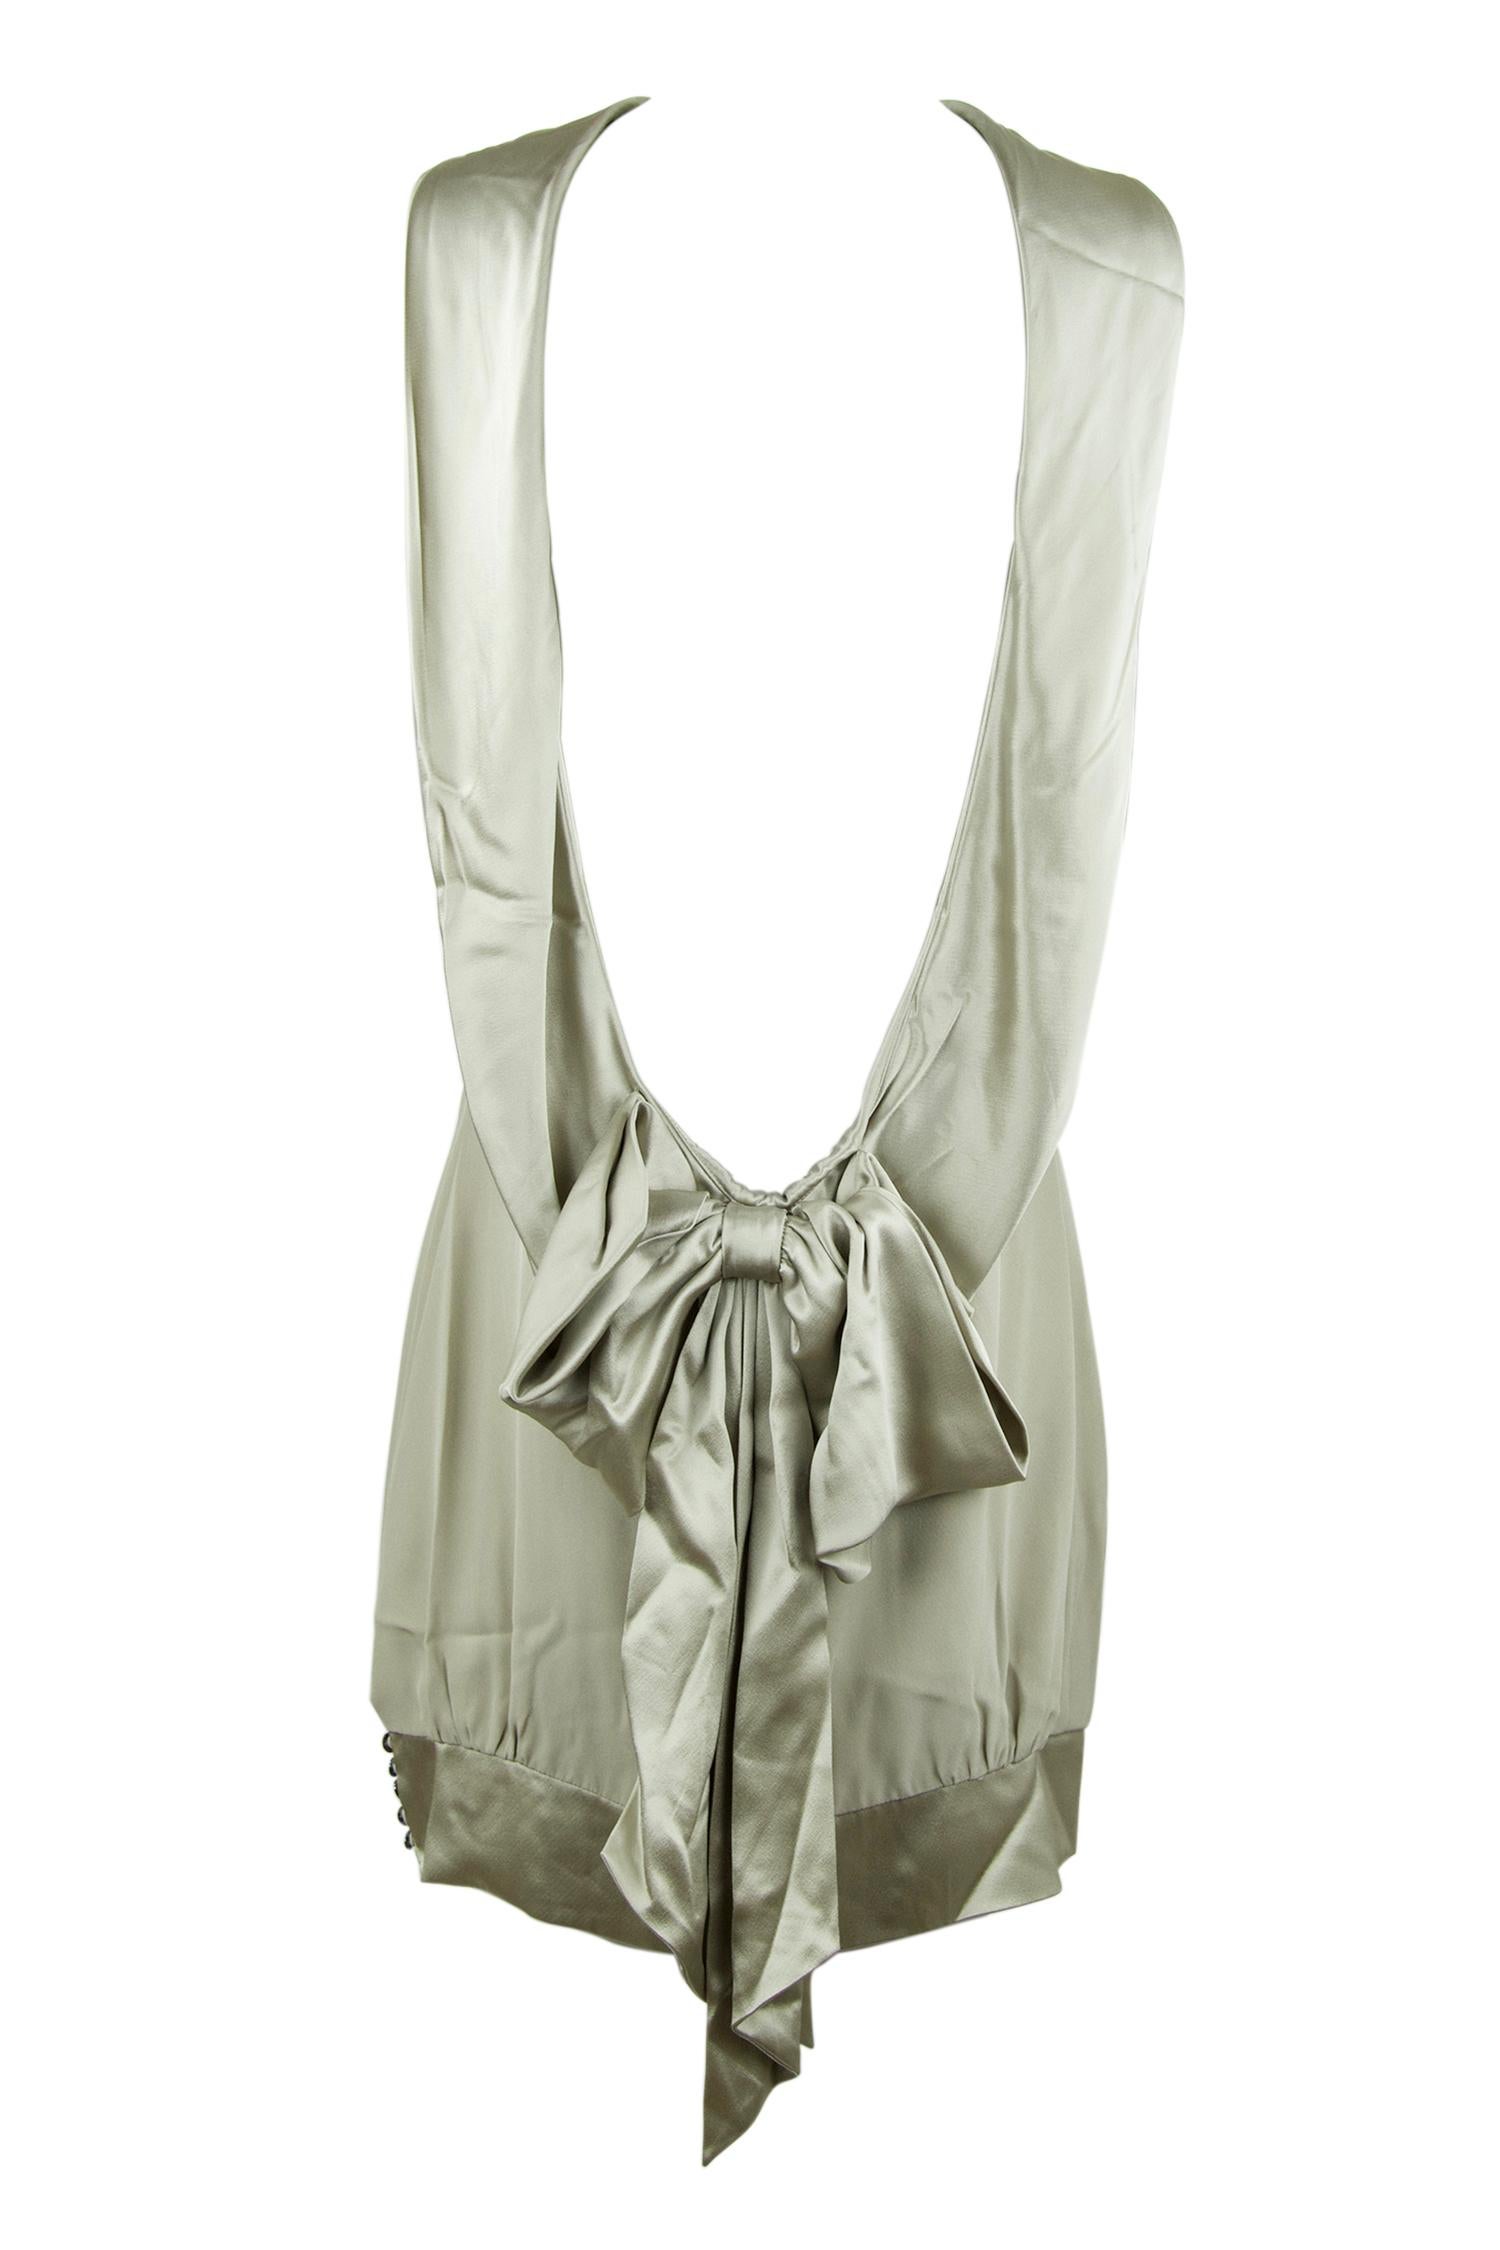 Stunning and sophisticated Loris Azzaro open back silk dress.  Features a high neck in the front with a charmeuse band with bow in the back.  Very elegant piece for your next cocktail party.

Size: No size tag but approximate S

Condition: Pristine,